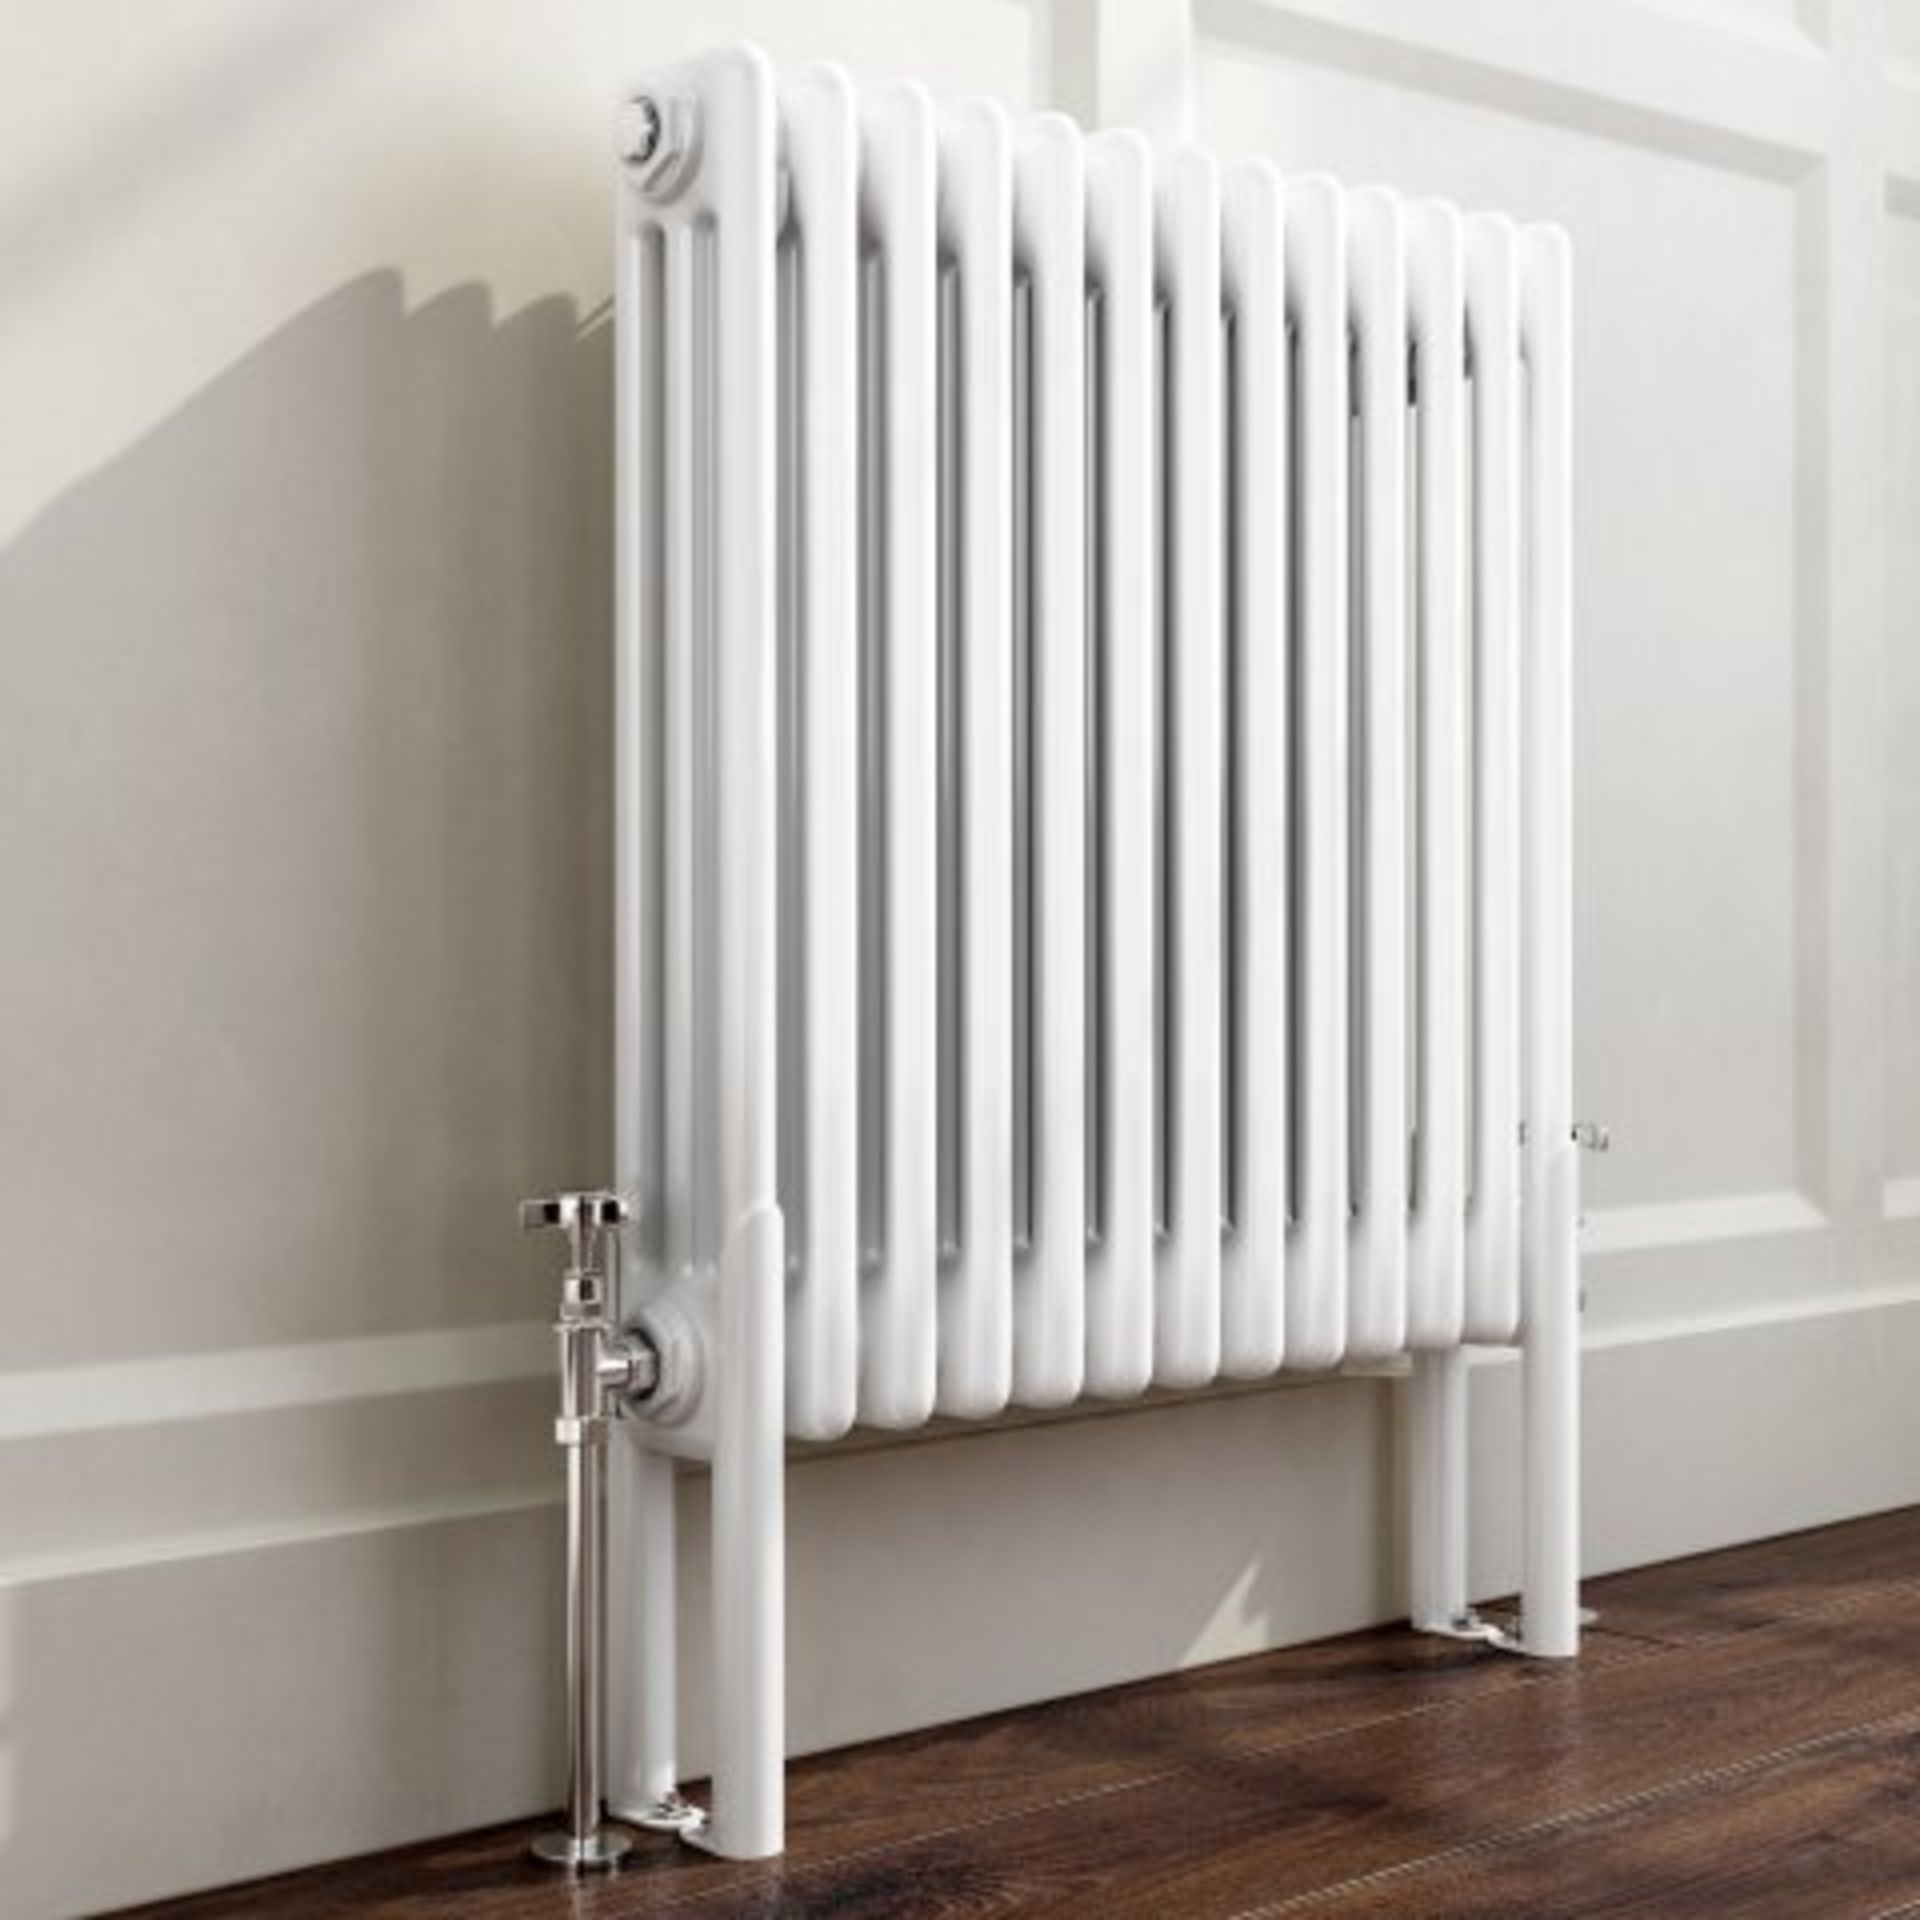 (M60) 300x72 - Wall Mounting Feet For 3 Bar Radiators - White Our supporting legs for radiators will - Image 2 of 2